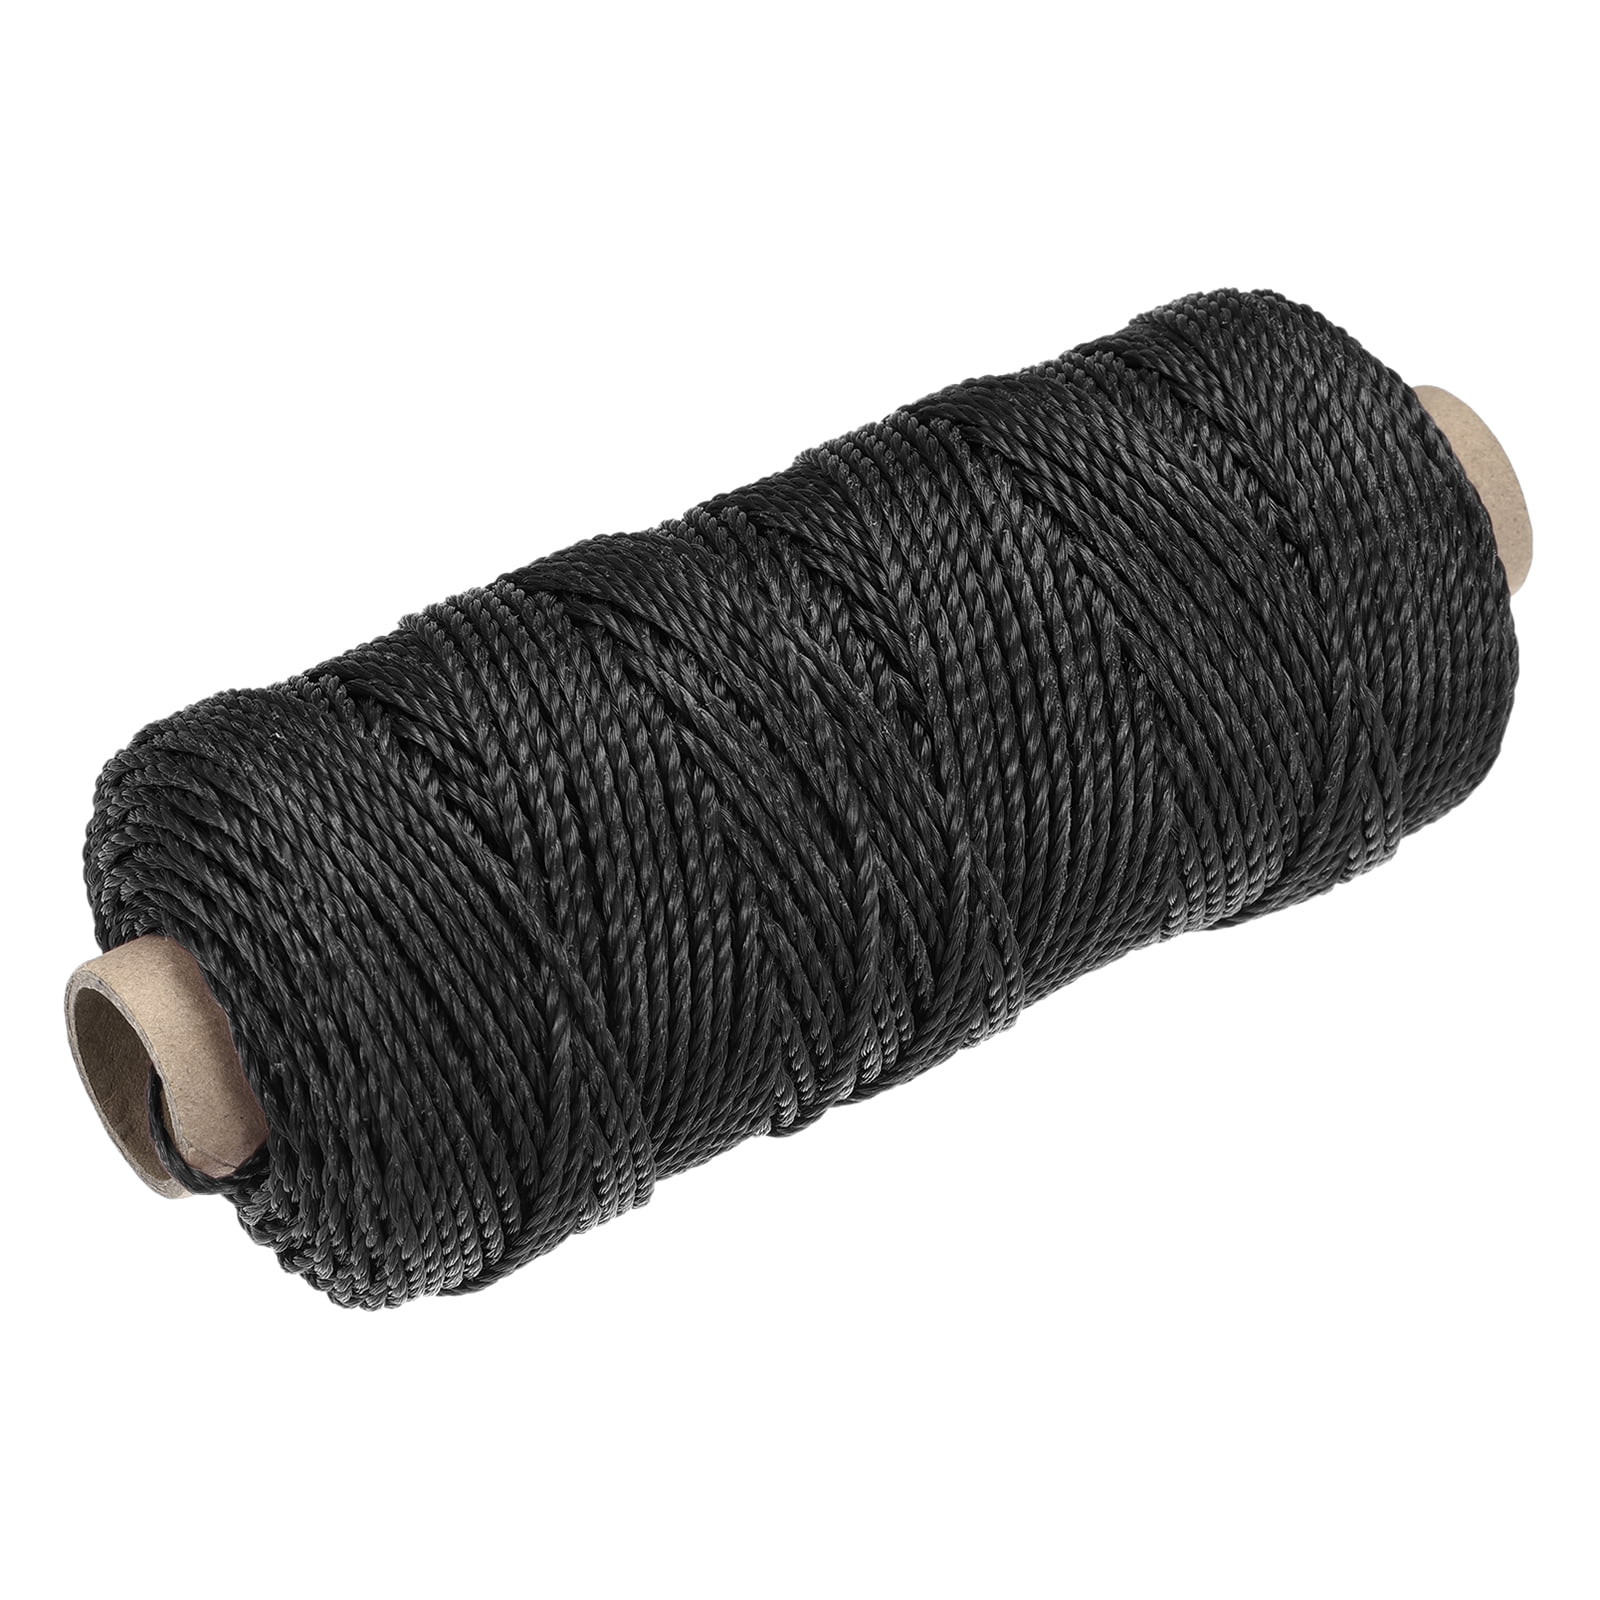 Uxcell Twisted Nylon Mason Line Black 100M/109 Yard 2MM Dia for DIY Projects